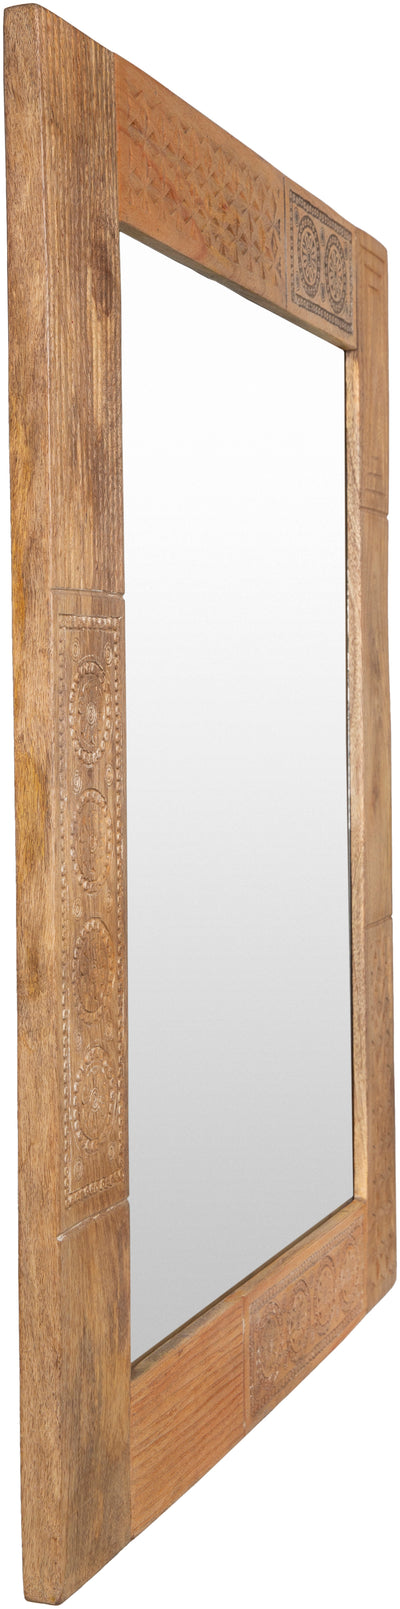 product image for Dilwara DLW-001 Rectangular Mirror in Natural by Surya 37